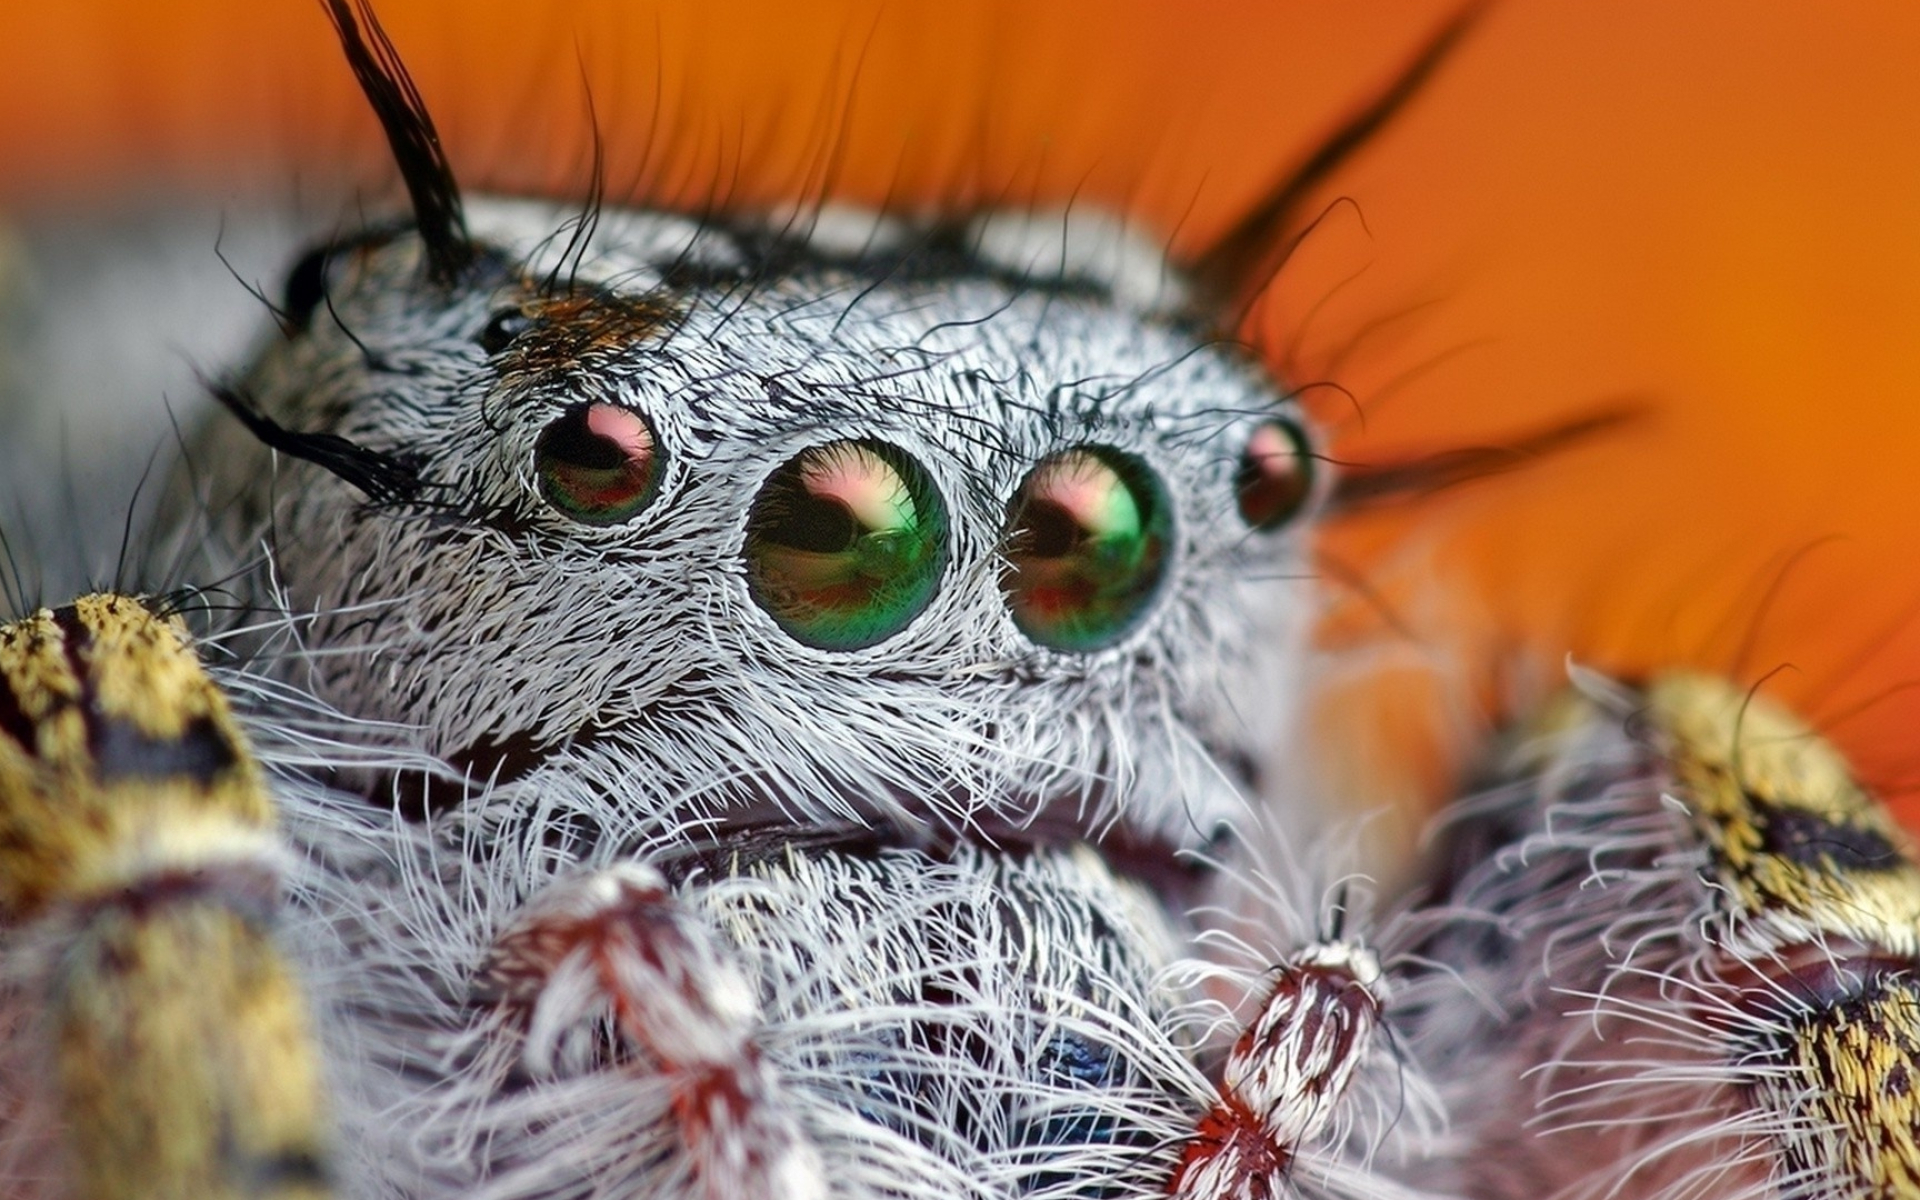 Spider, Jumping spider wallpaper, Natural beauty, Wallpapers collection, 1920x1200 HD Desktop